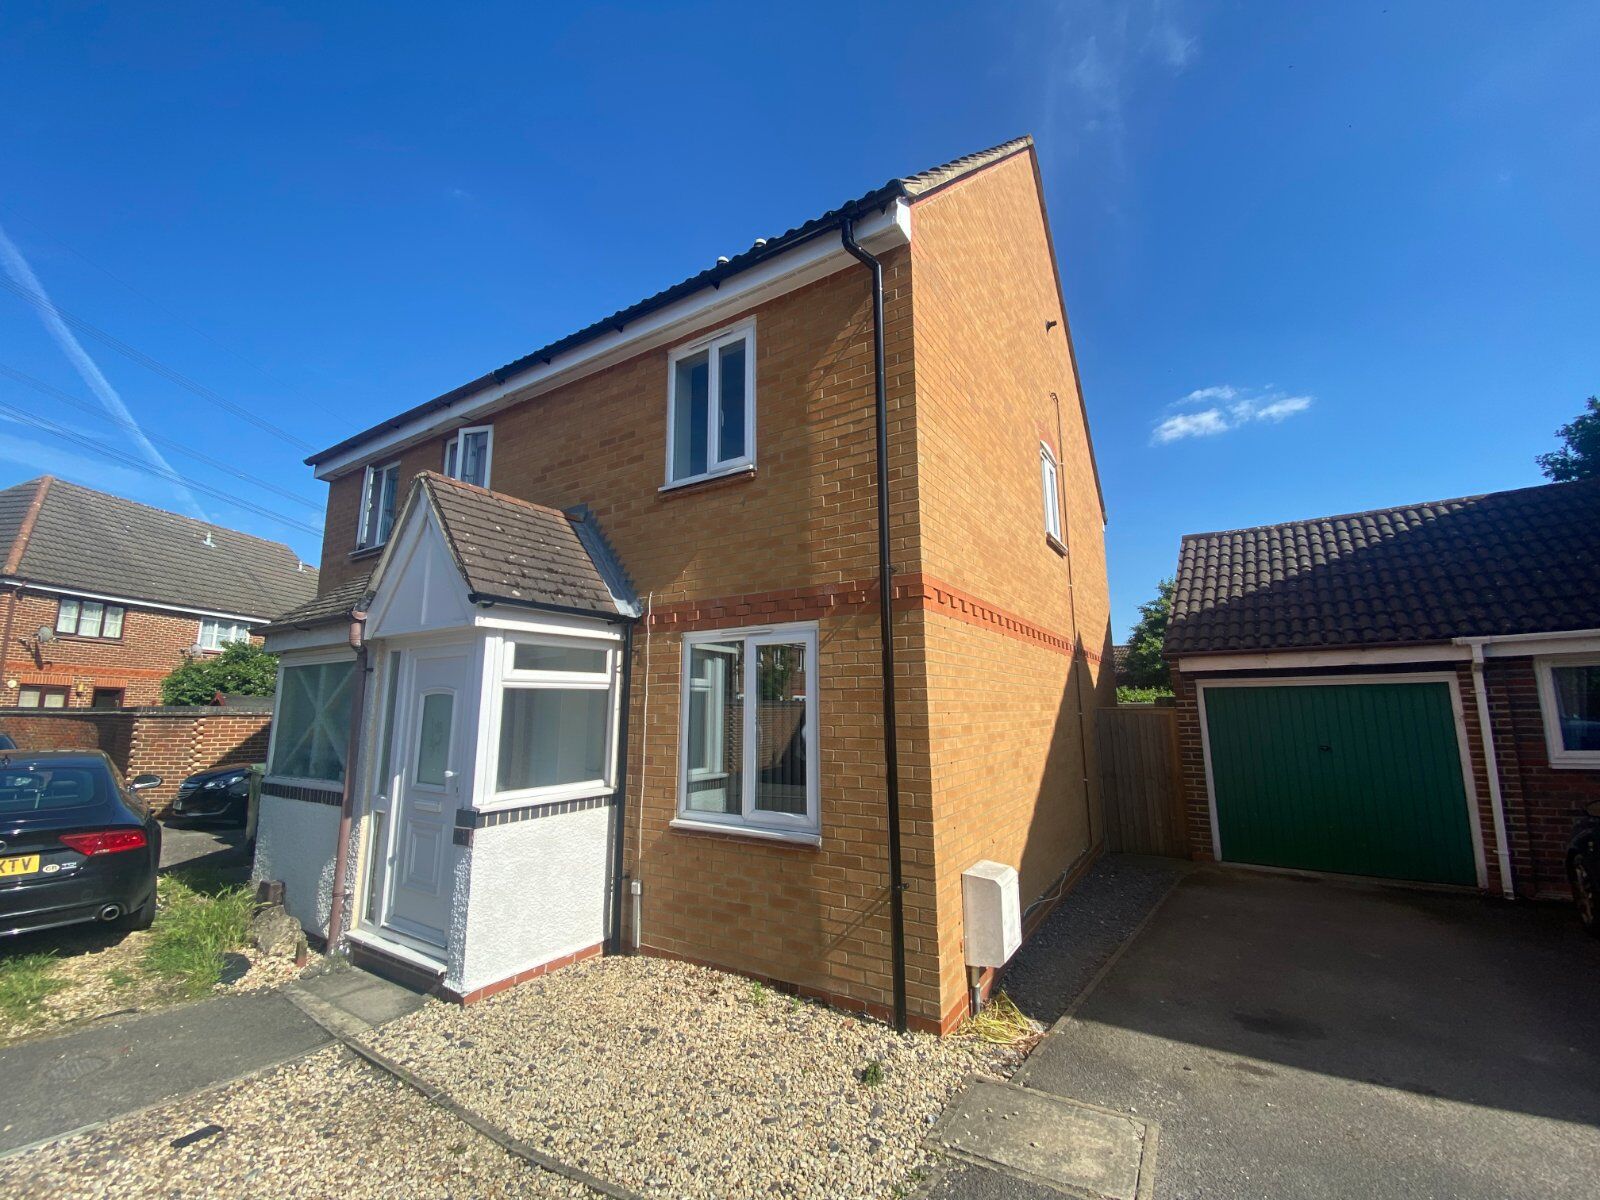 2 bedroom semi detached house to rent, Available from 30/04/2024 Humber Close, Didcot, OX11, main image